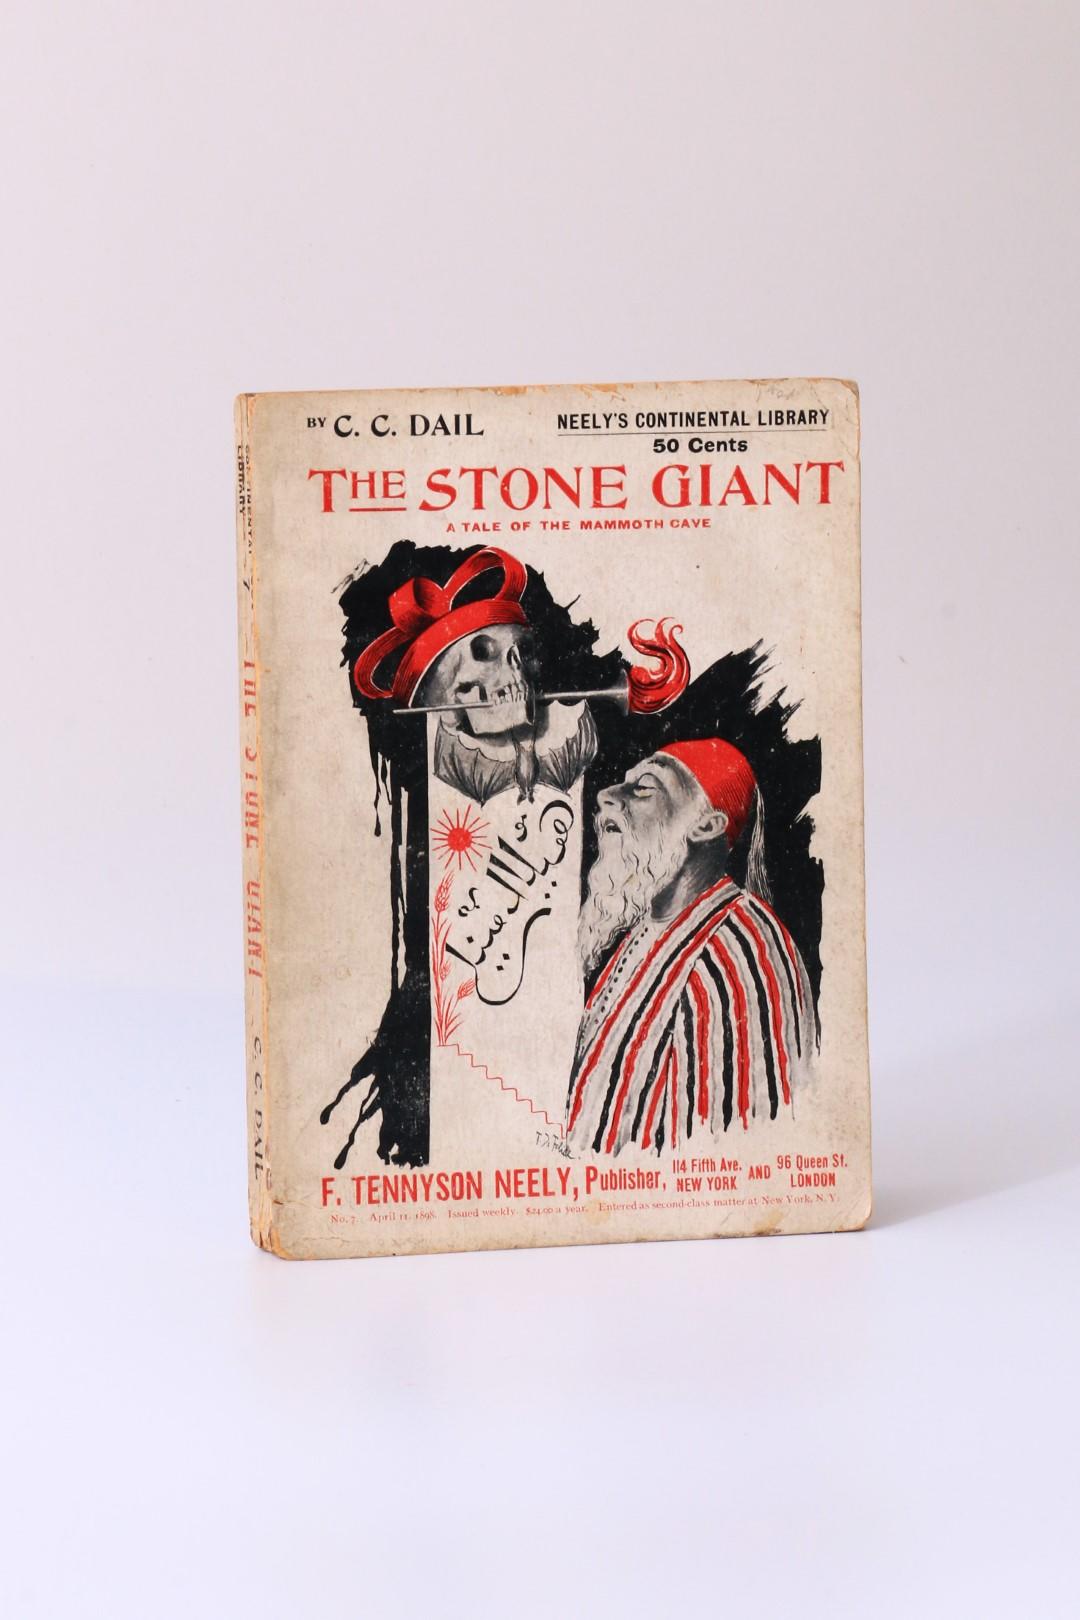 C.C. Dail - The Stone Giant - A Tale of the Mammoth Cave - F. Tennyson Neely, 1898, First Edition.